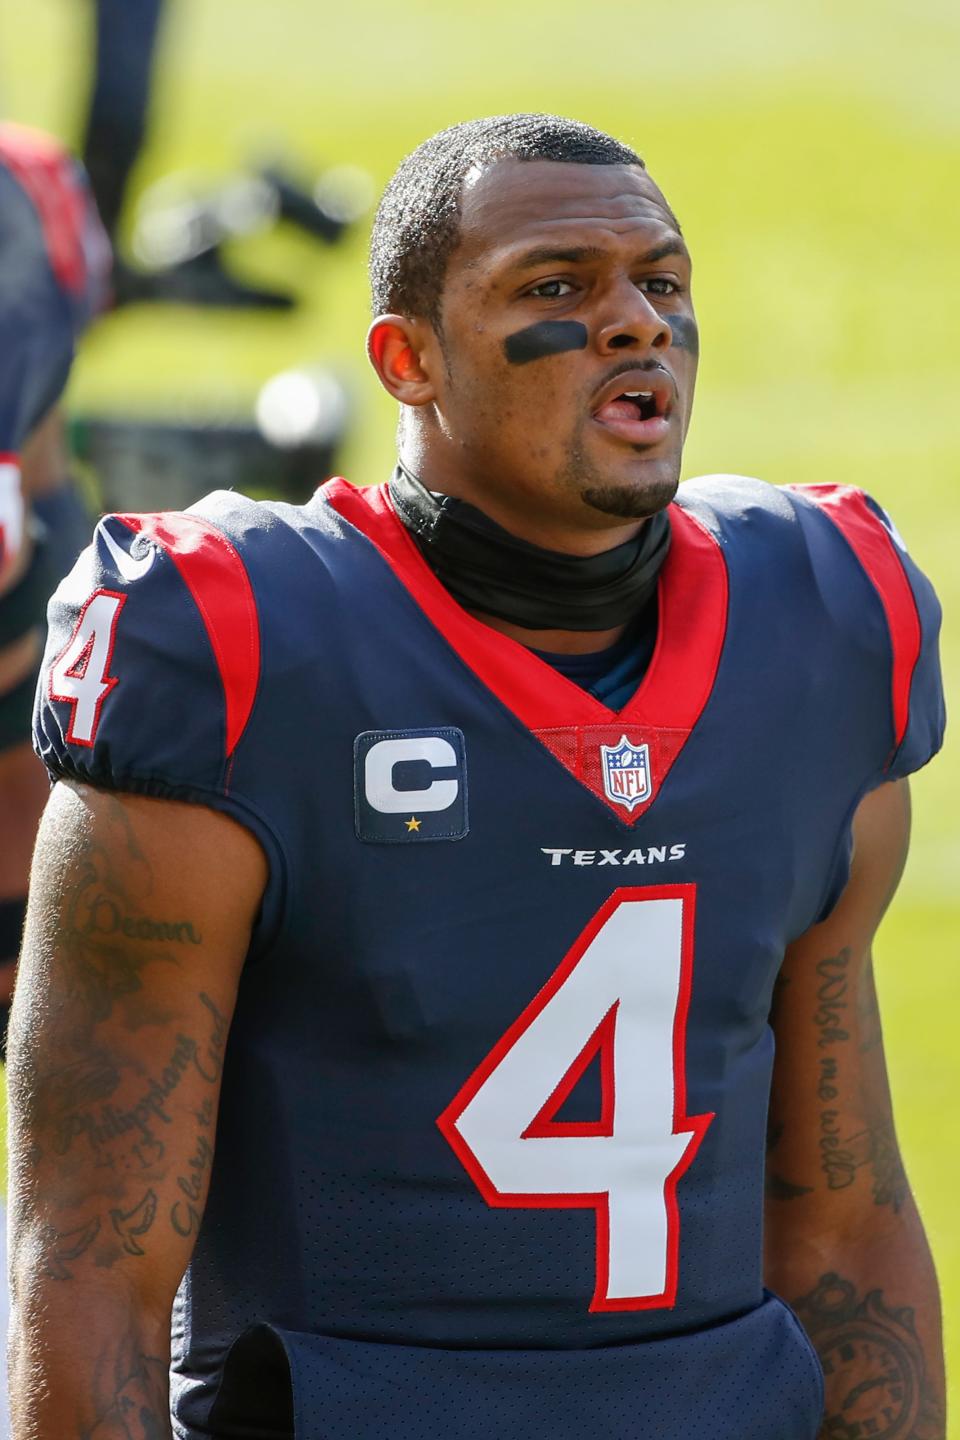 Twenty-two women have filed lawsuits against Deshaun Watson accusing the Texans quarterback of sexual harassment.